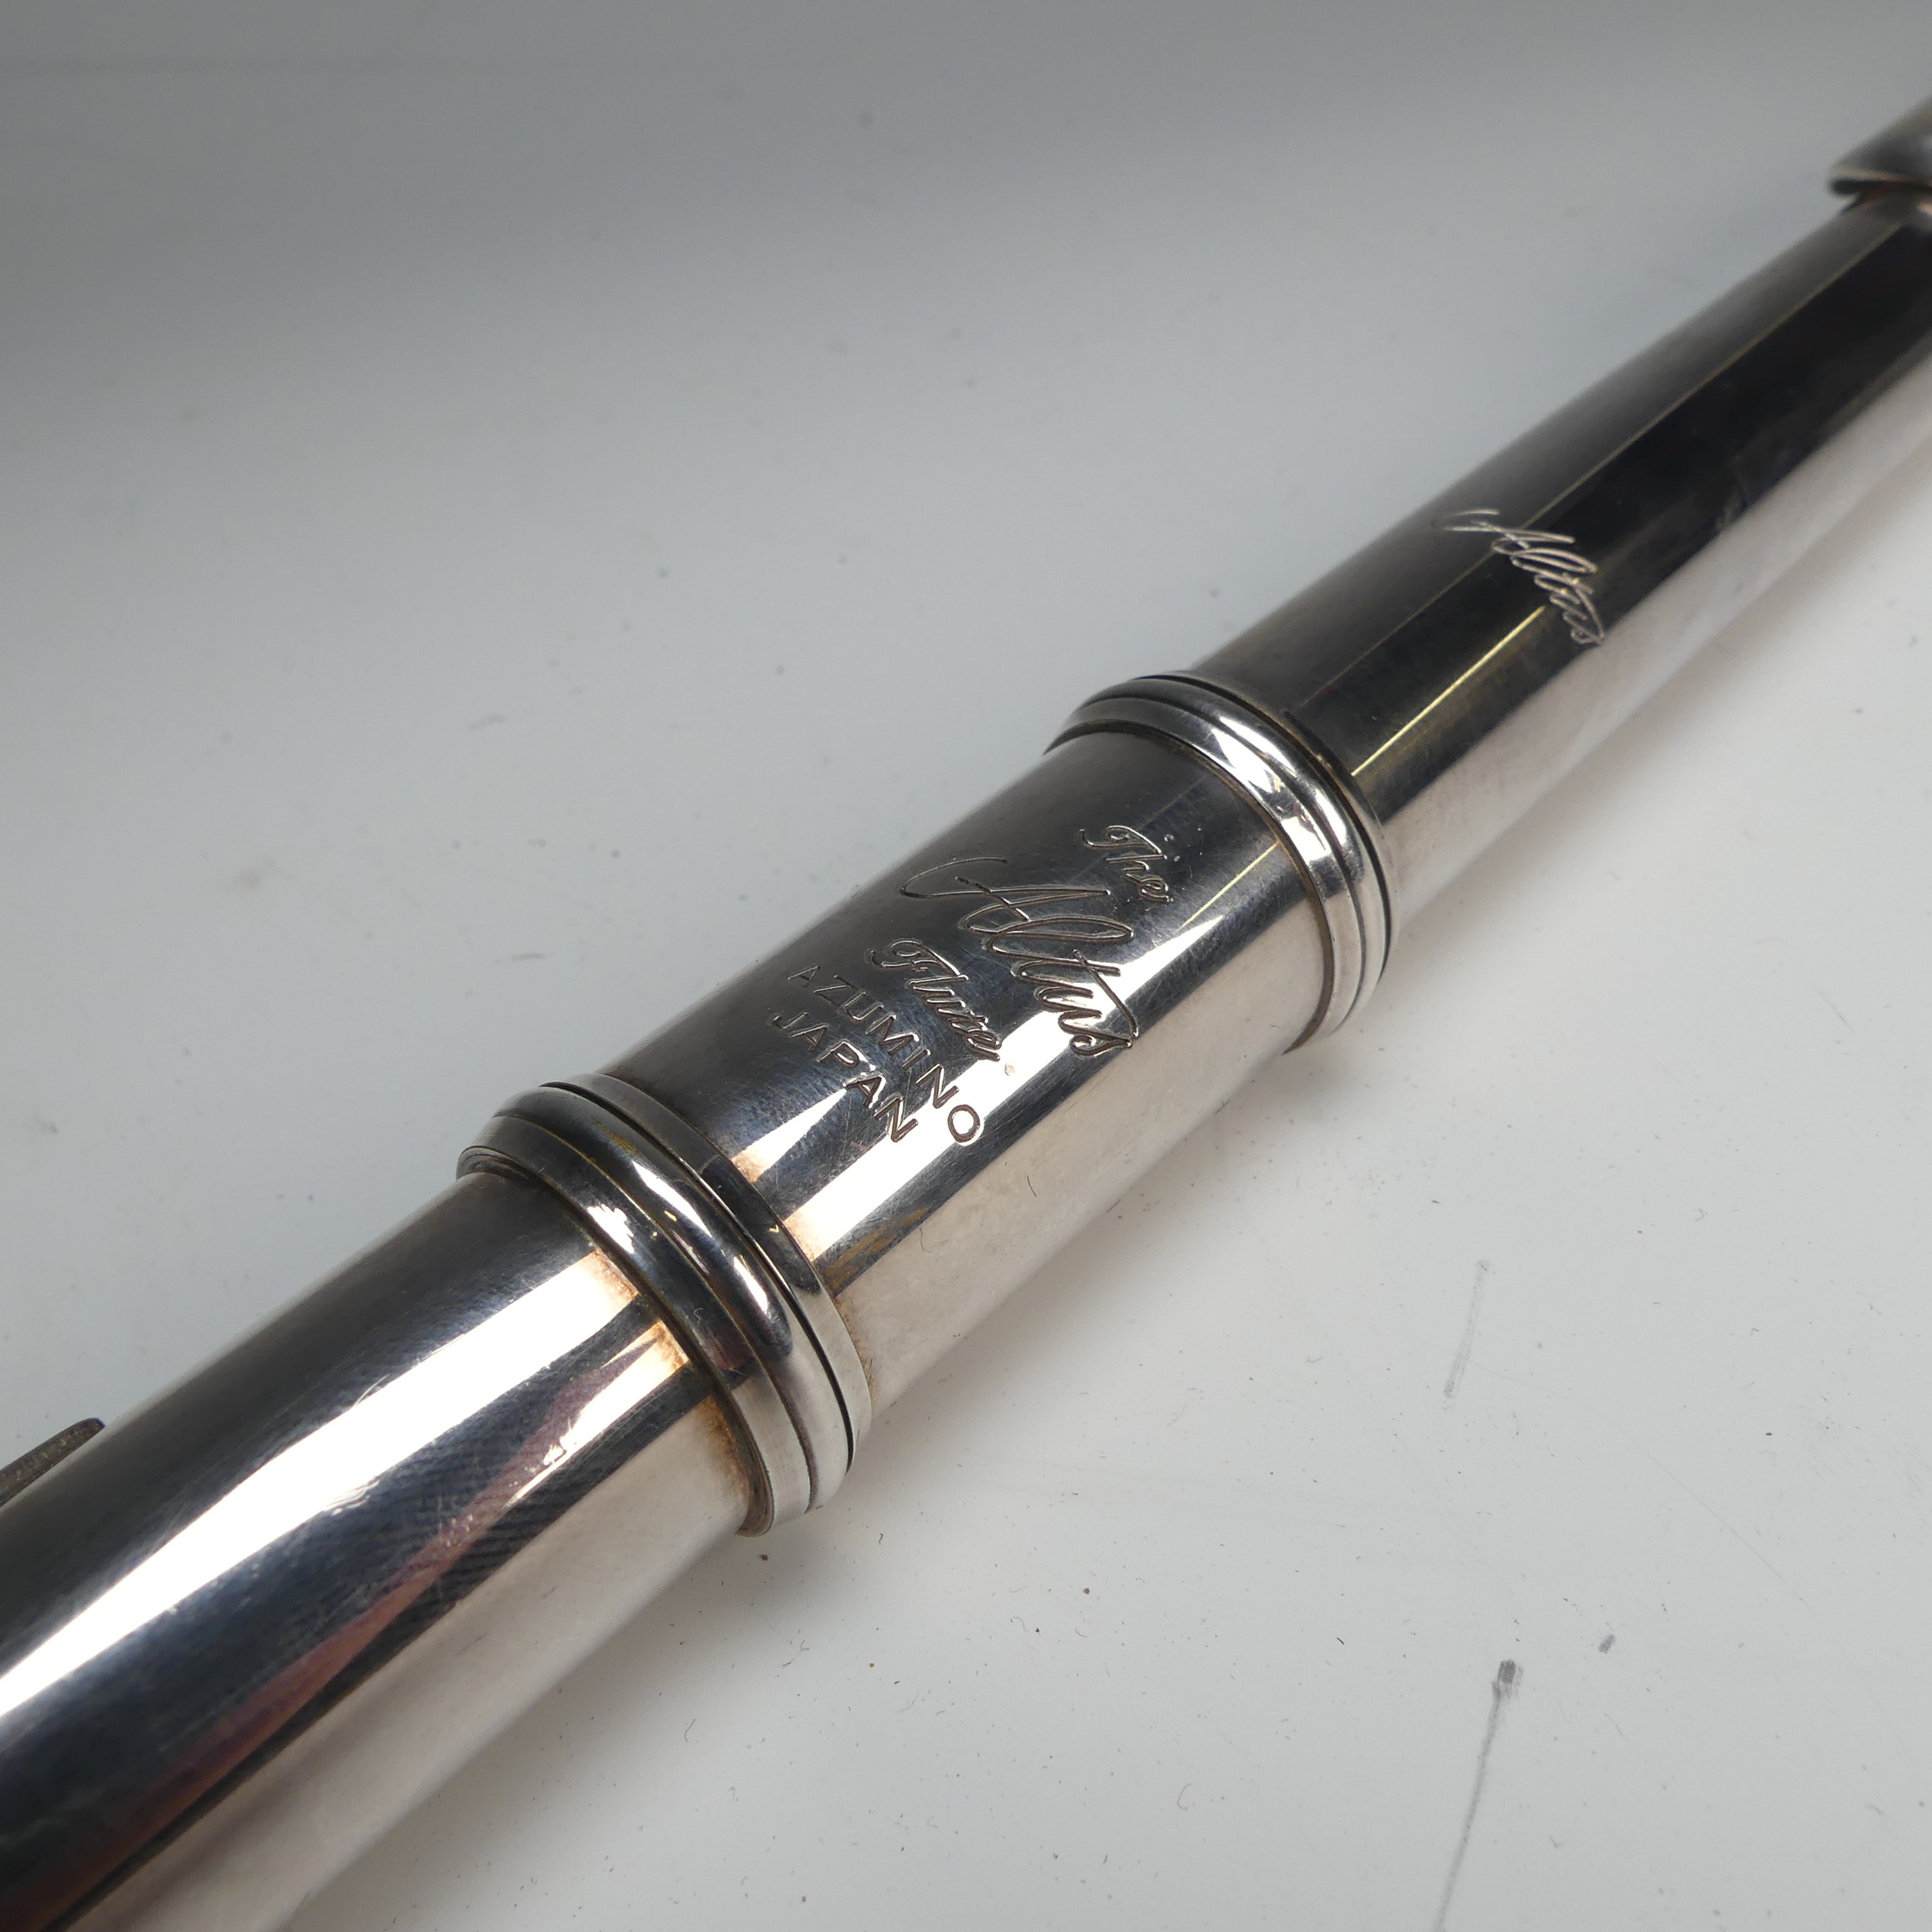 An Altus A907 Flute, with .900 silver headjoint and silver plated body, serial no. 007397, the - Image 8 of 11